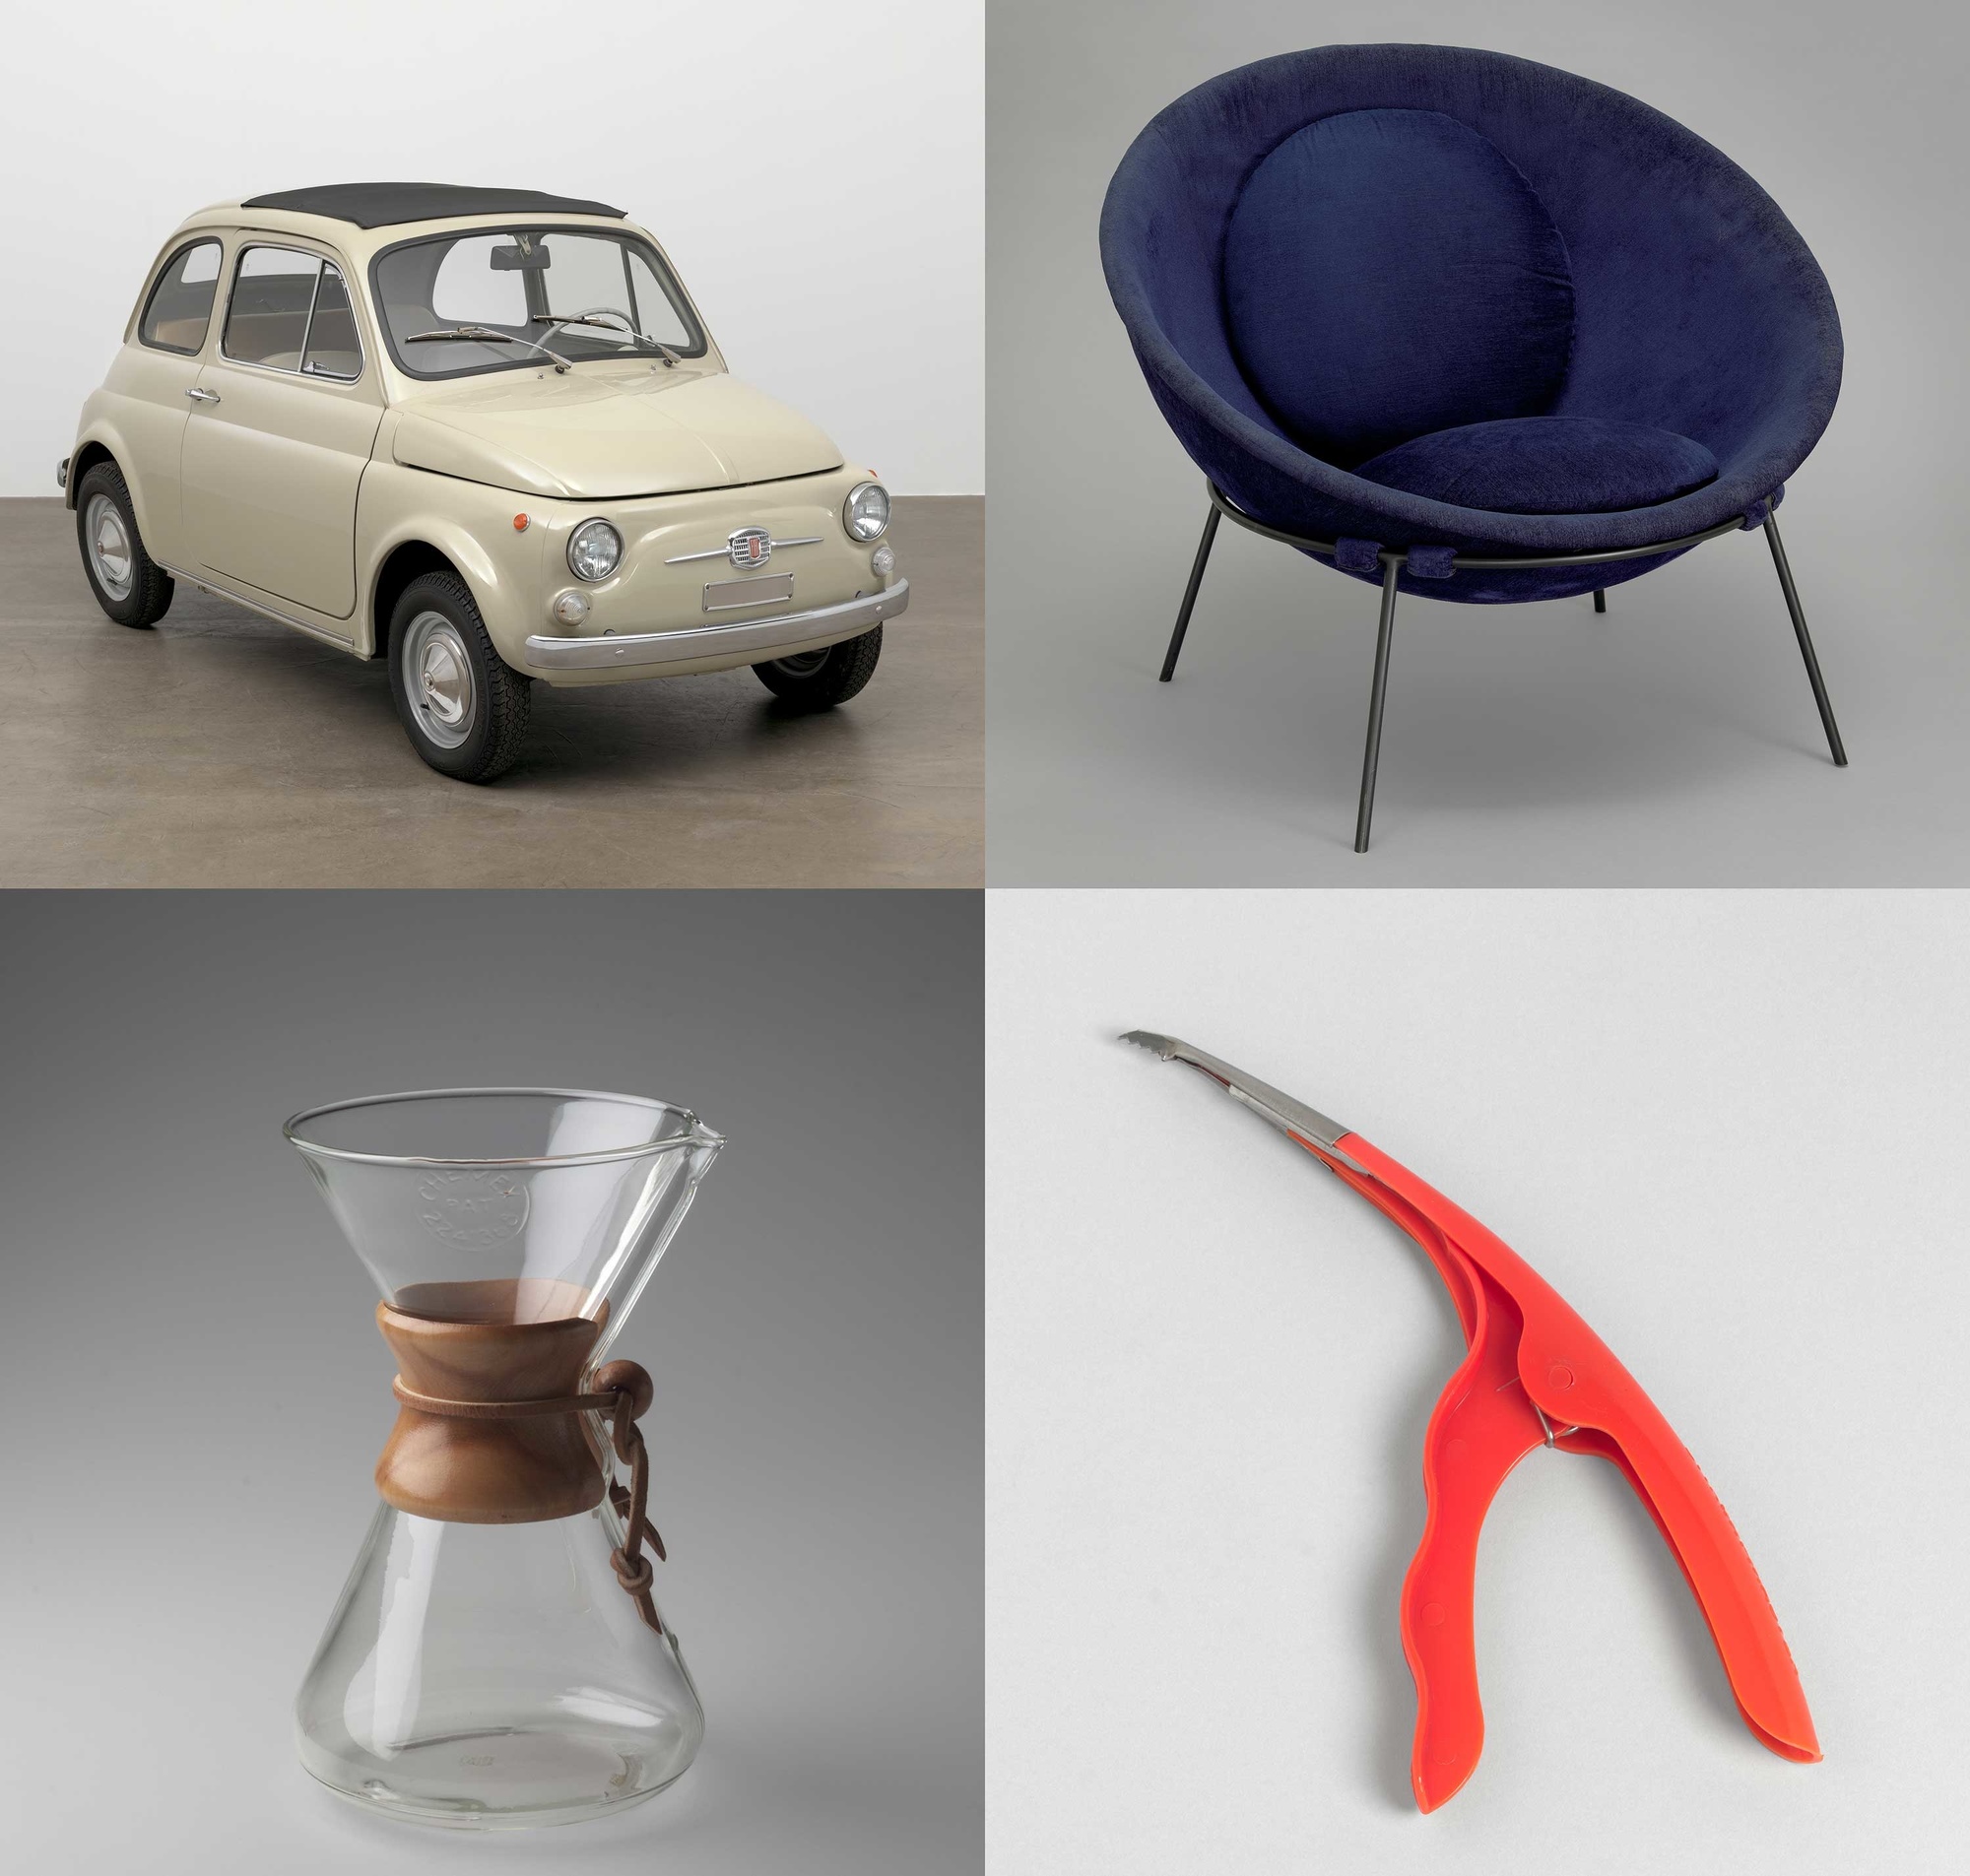 Clockwise, from top left: Dante Giacosa. 500f city car. Designed 1957 (this example 1968).  Manufacturer: Fiat S.p.A., Turin, Italy. Gift of Fiat Chrysler Automobiles Heritage; Lina Bo Bardi. Poltrona Bowl chair. 1951. Steel and fabric; Irwin Gershen, Gershen-Newark. Shrimp Cleaner. 1954. Plastic and metal. Manufacturer: Plastic Dispensers Inc., Newark, NJ. Chemex Coffee Maker. 1941. Pyrex glass, wood, and leather,. Manufacturer: Chemex Corp., New York, NY. Image courtesy MoMA